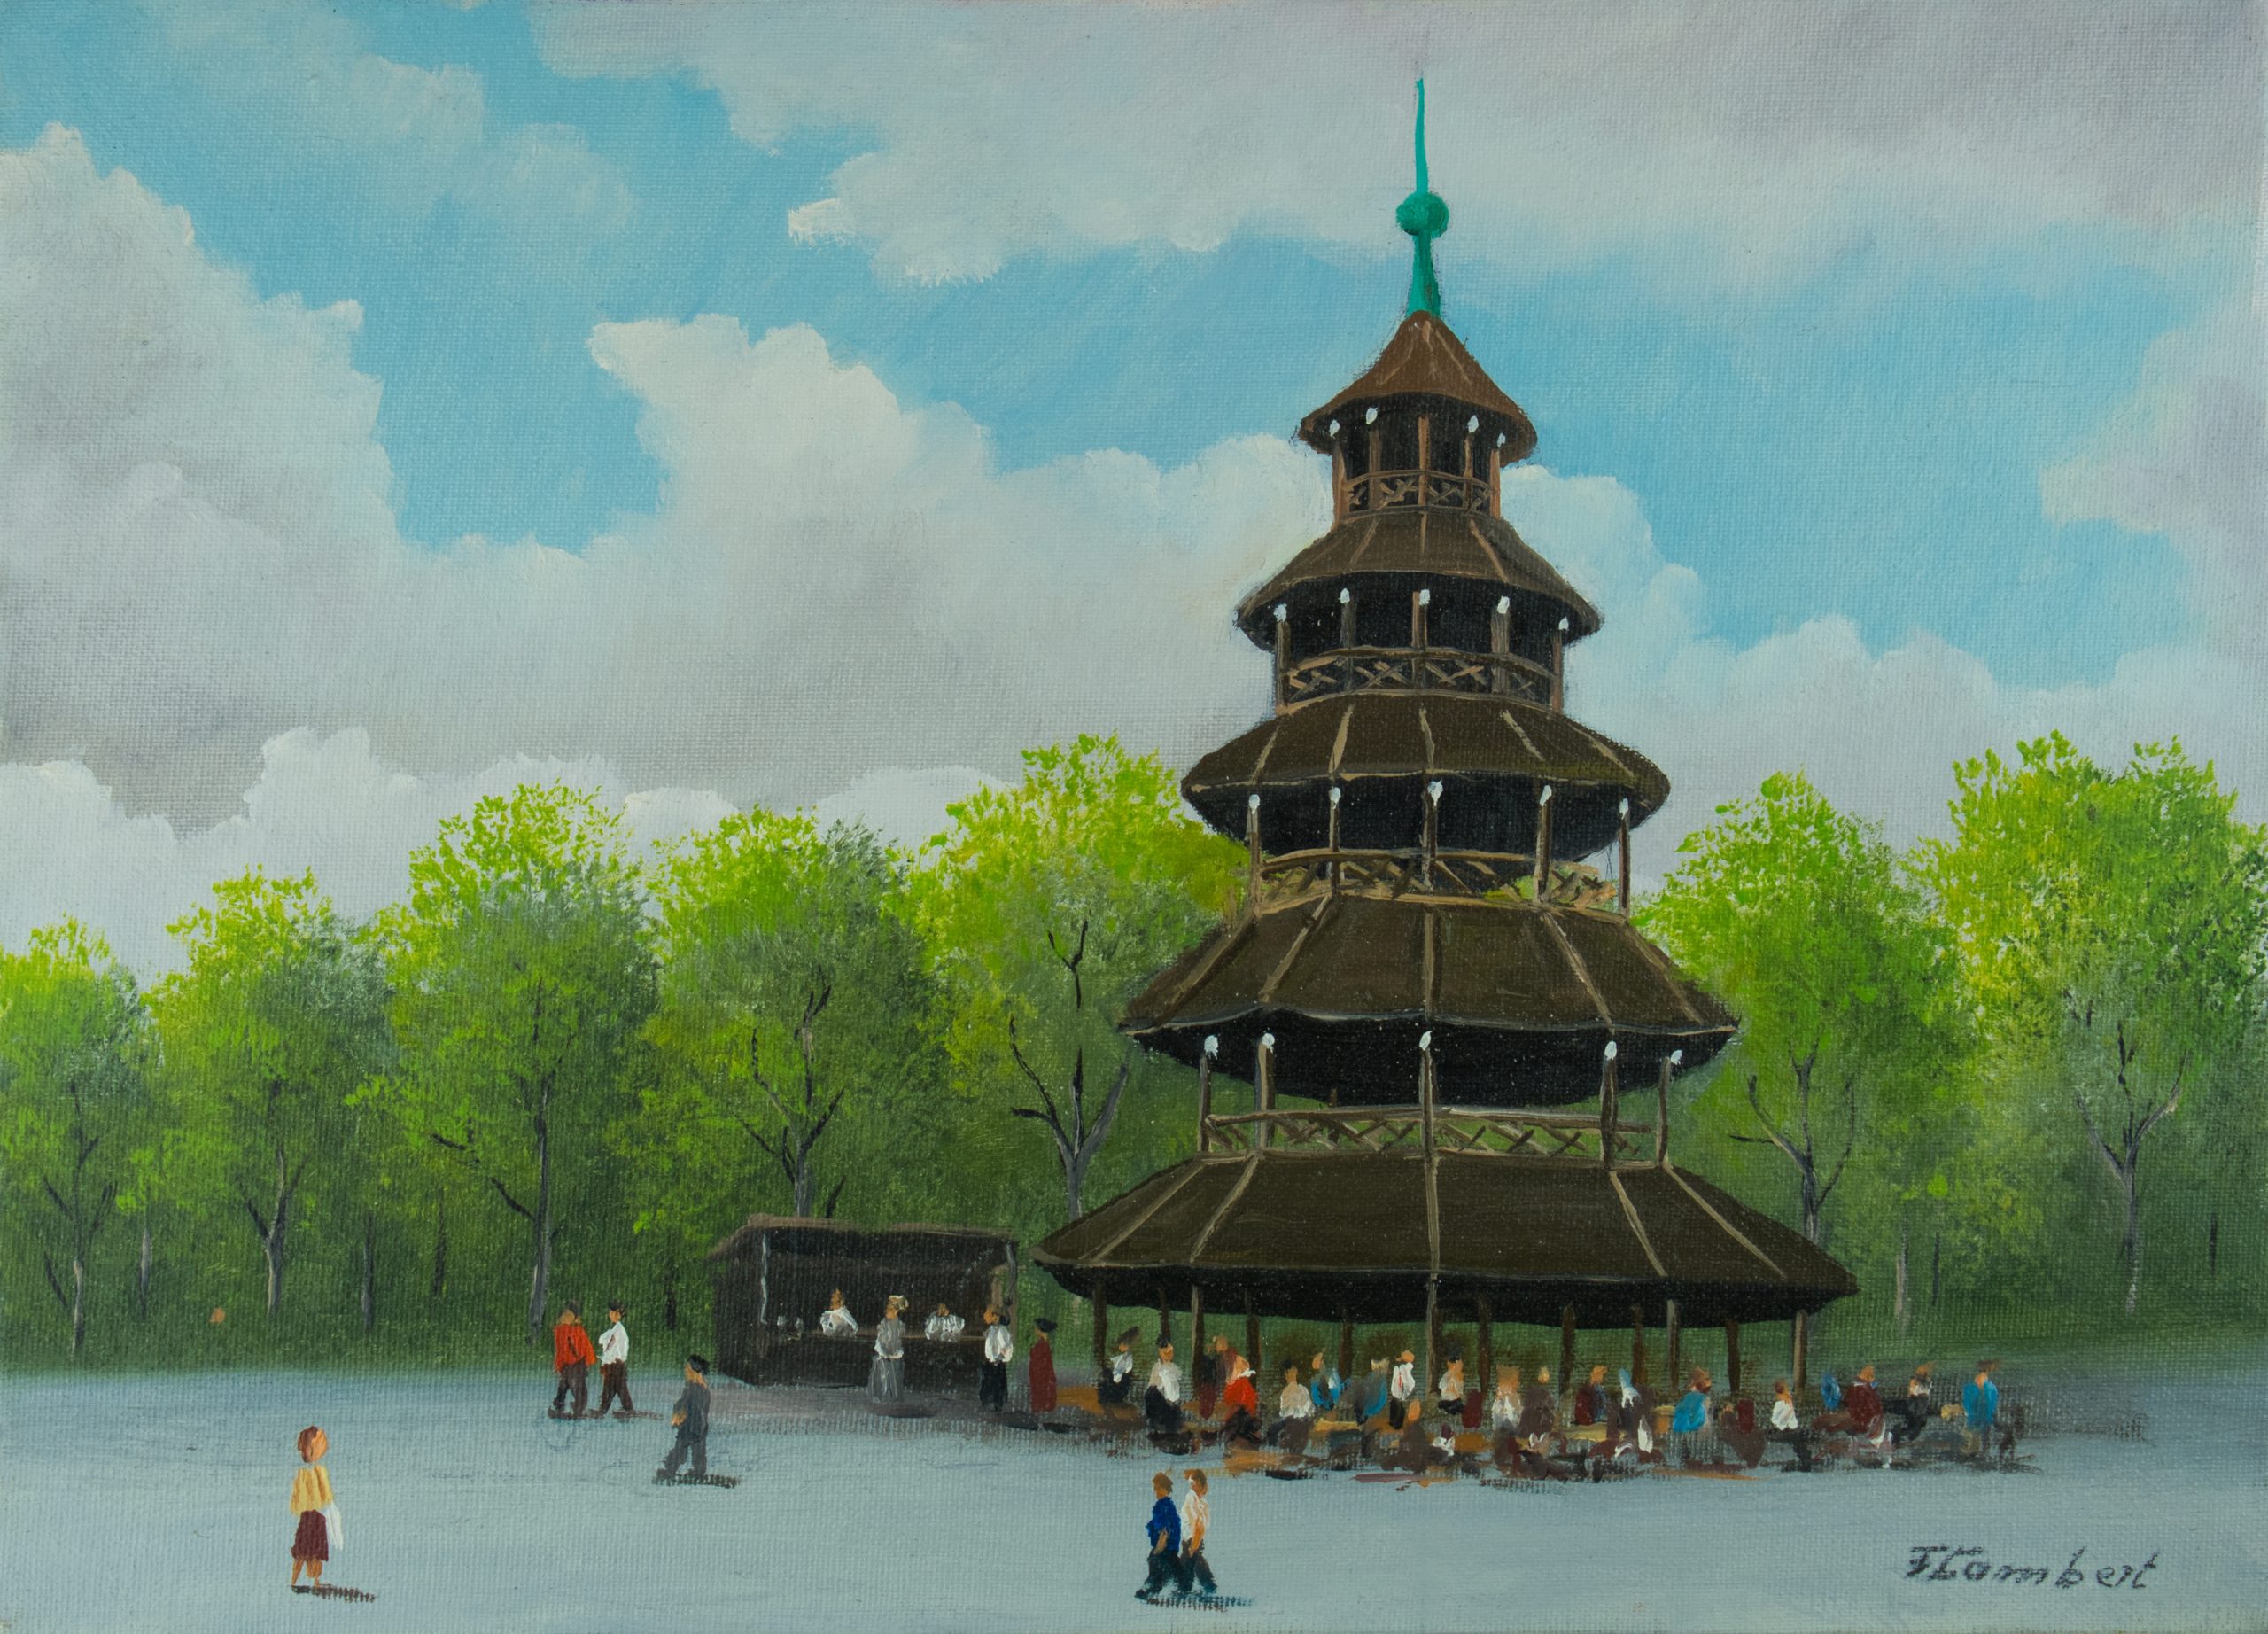 The Chinese Tower in the English Garden (Image: Adobe Stock)